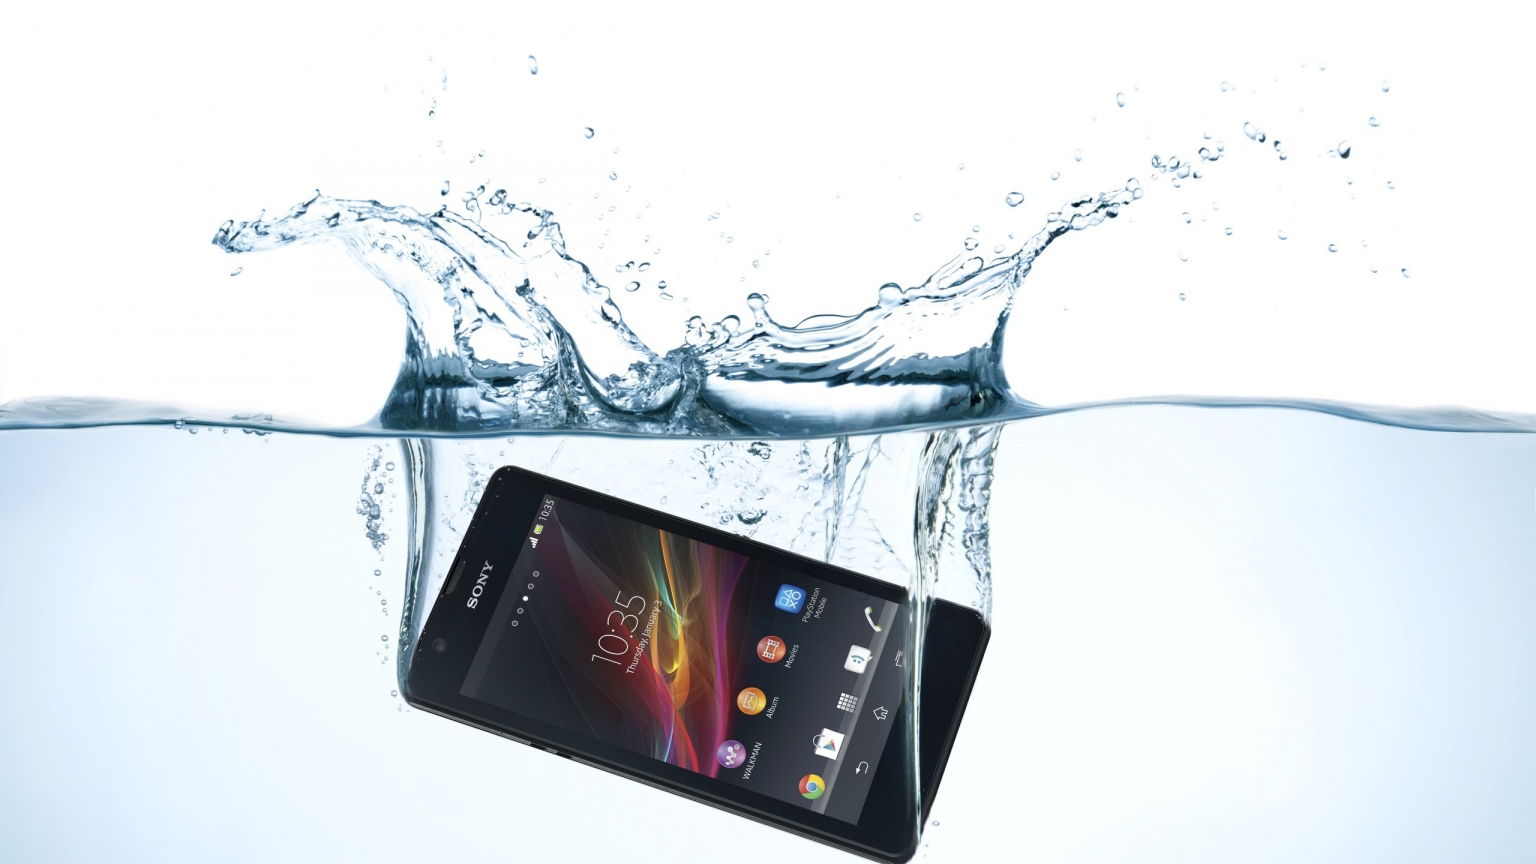 Sony Xperia Swimming for 1536 x 864 HDTV resolution